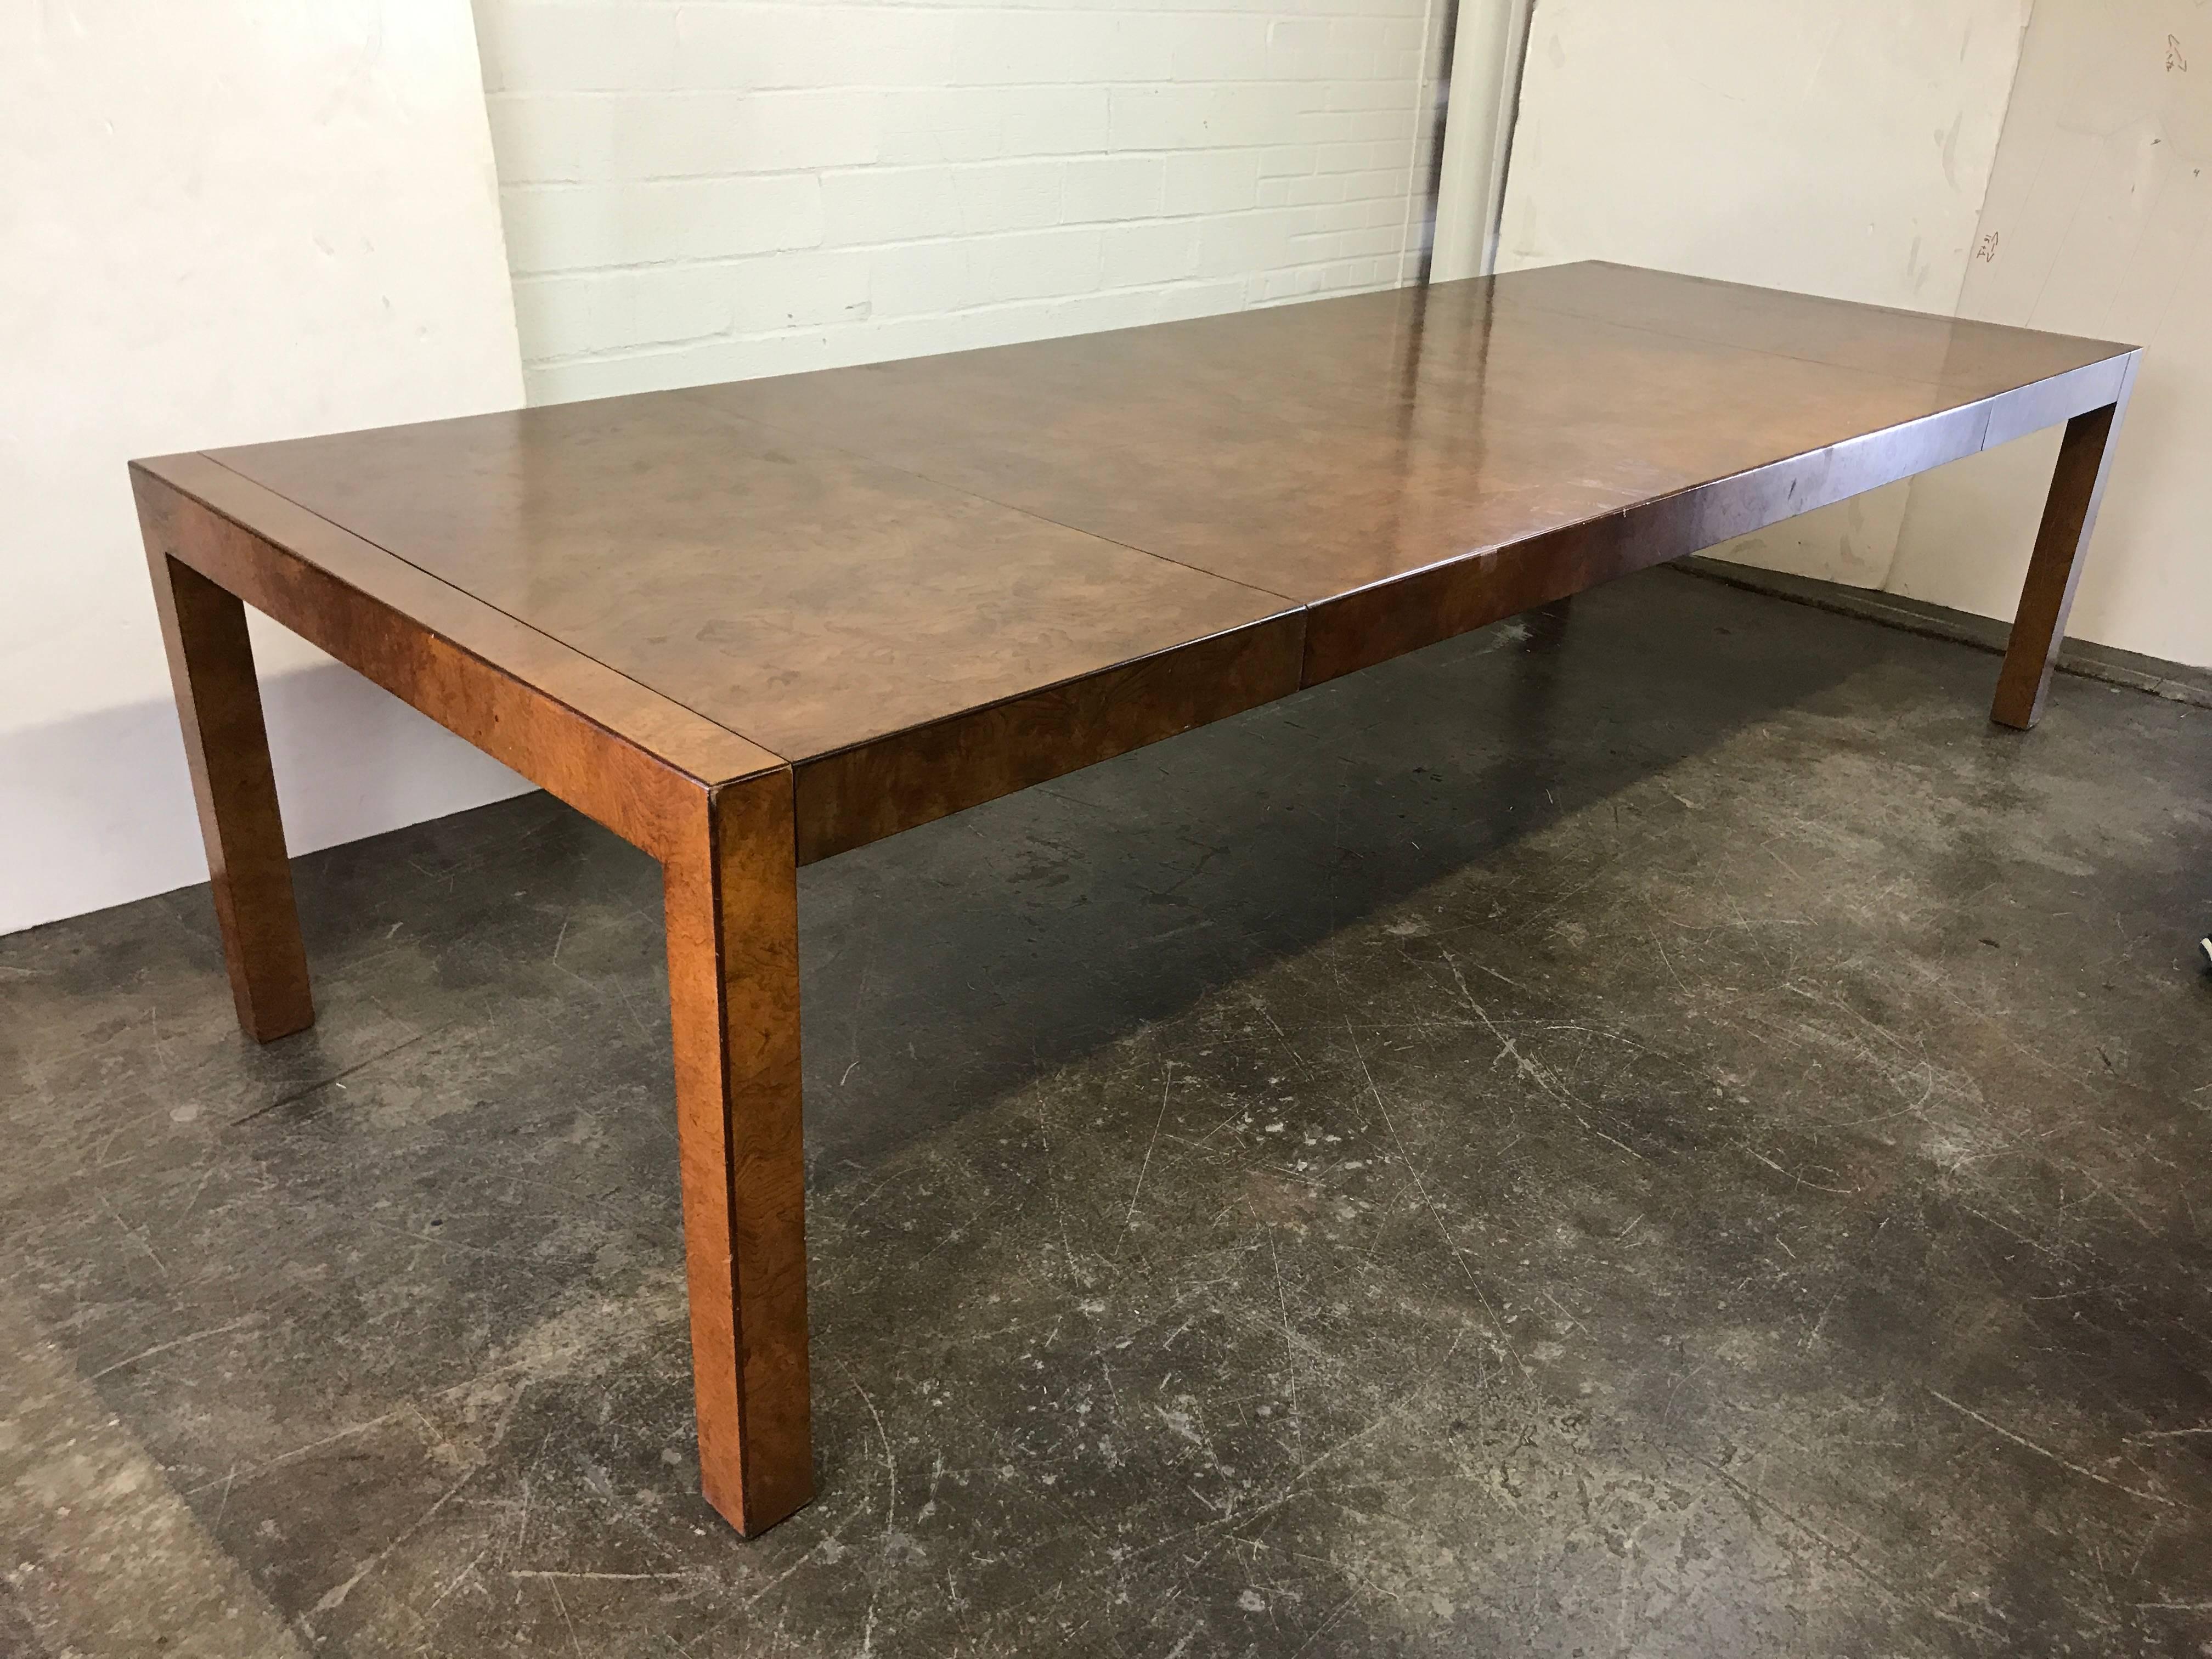 Burl wood Parsons style dining table by Widdicomb. In good found condition with wear due to age and use. Refinishing is recommended, circa 1970s

Dimensions: 120" W x 43" D x 29.5" T fully extended with two 24" leaves.